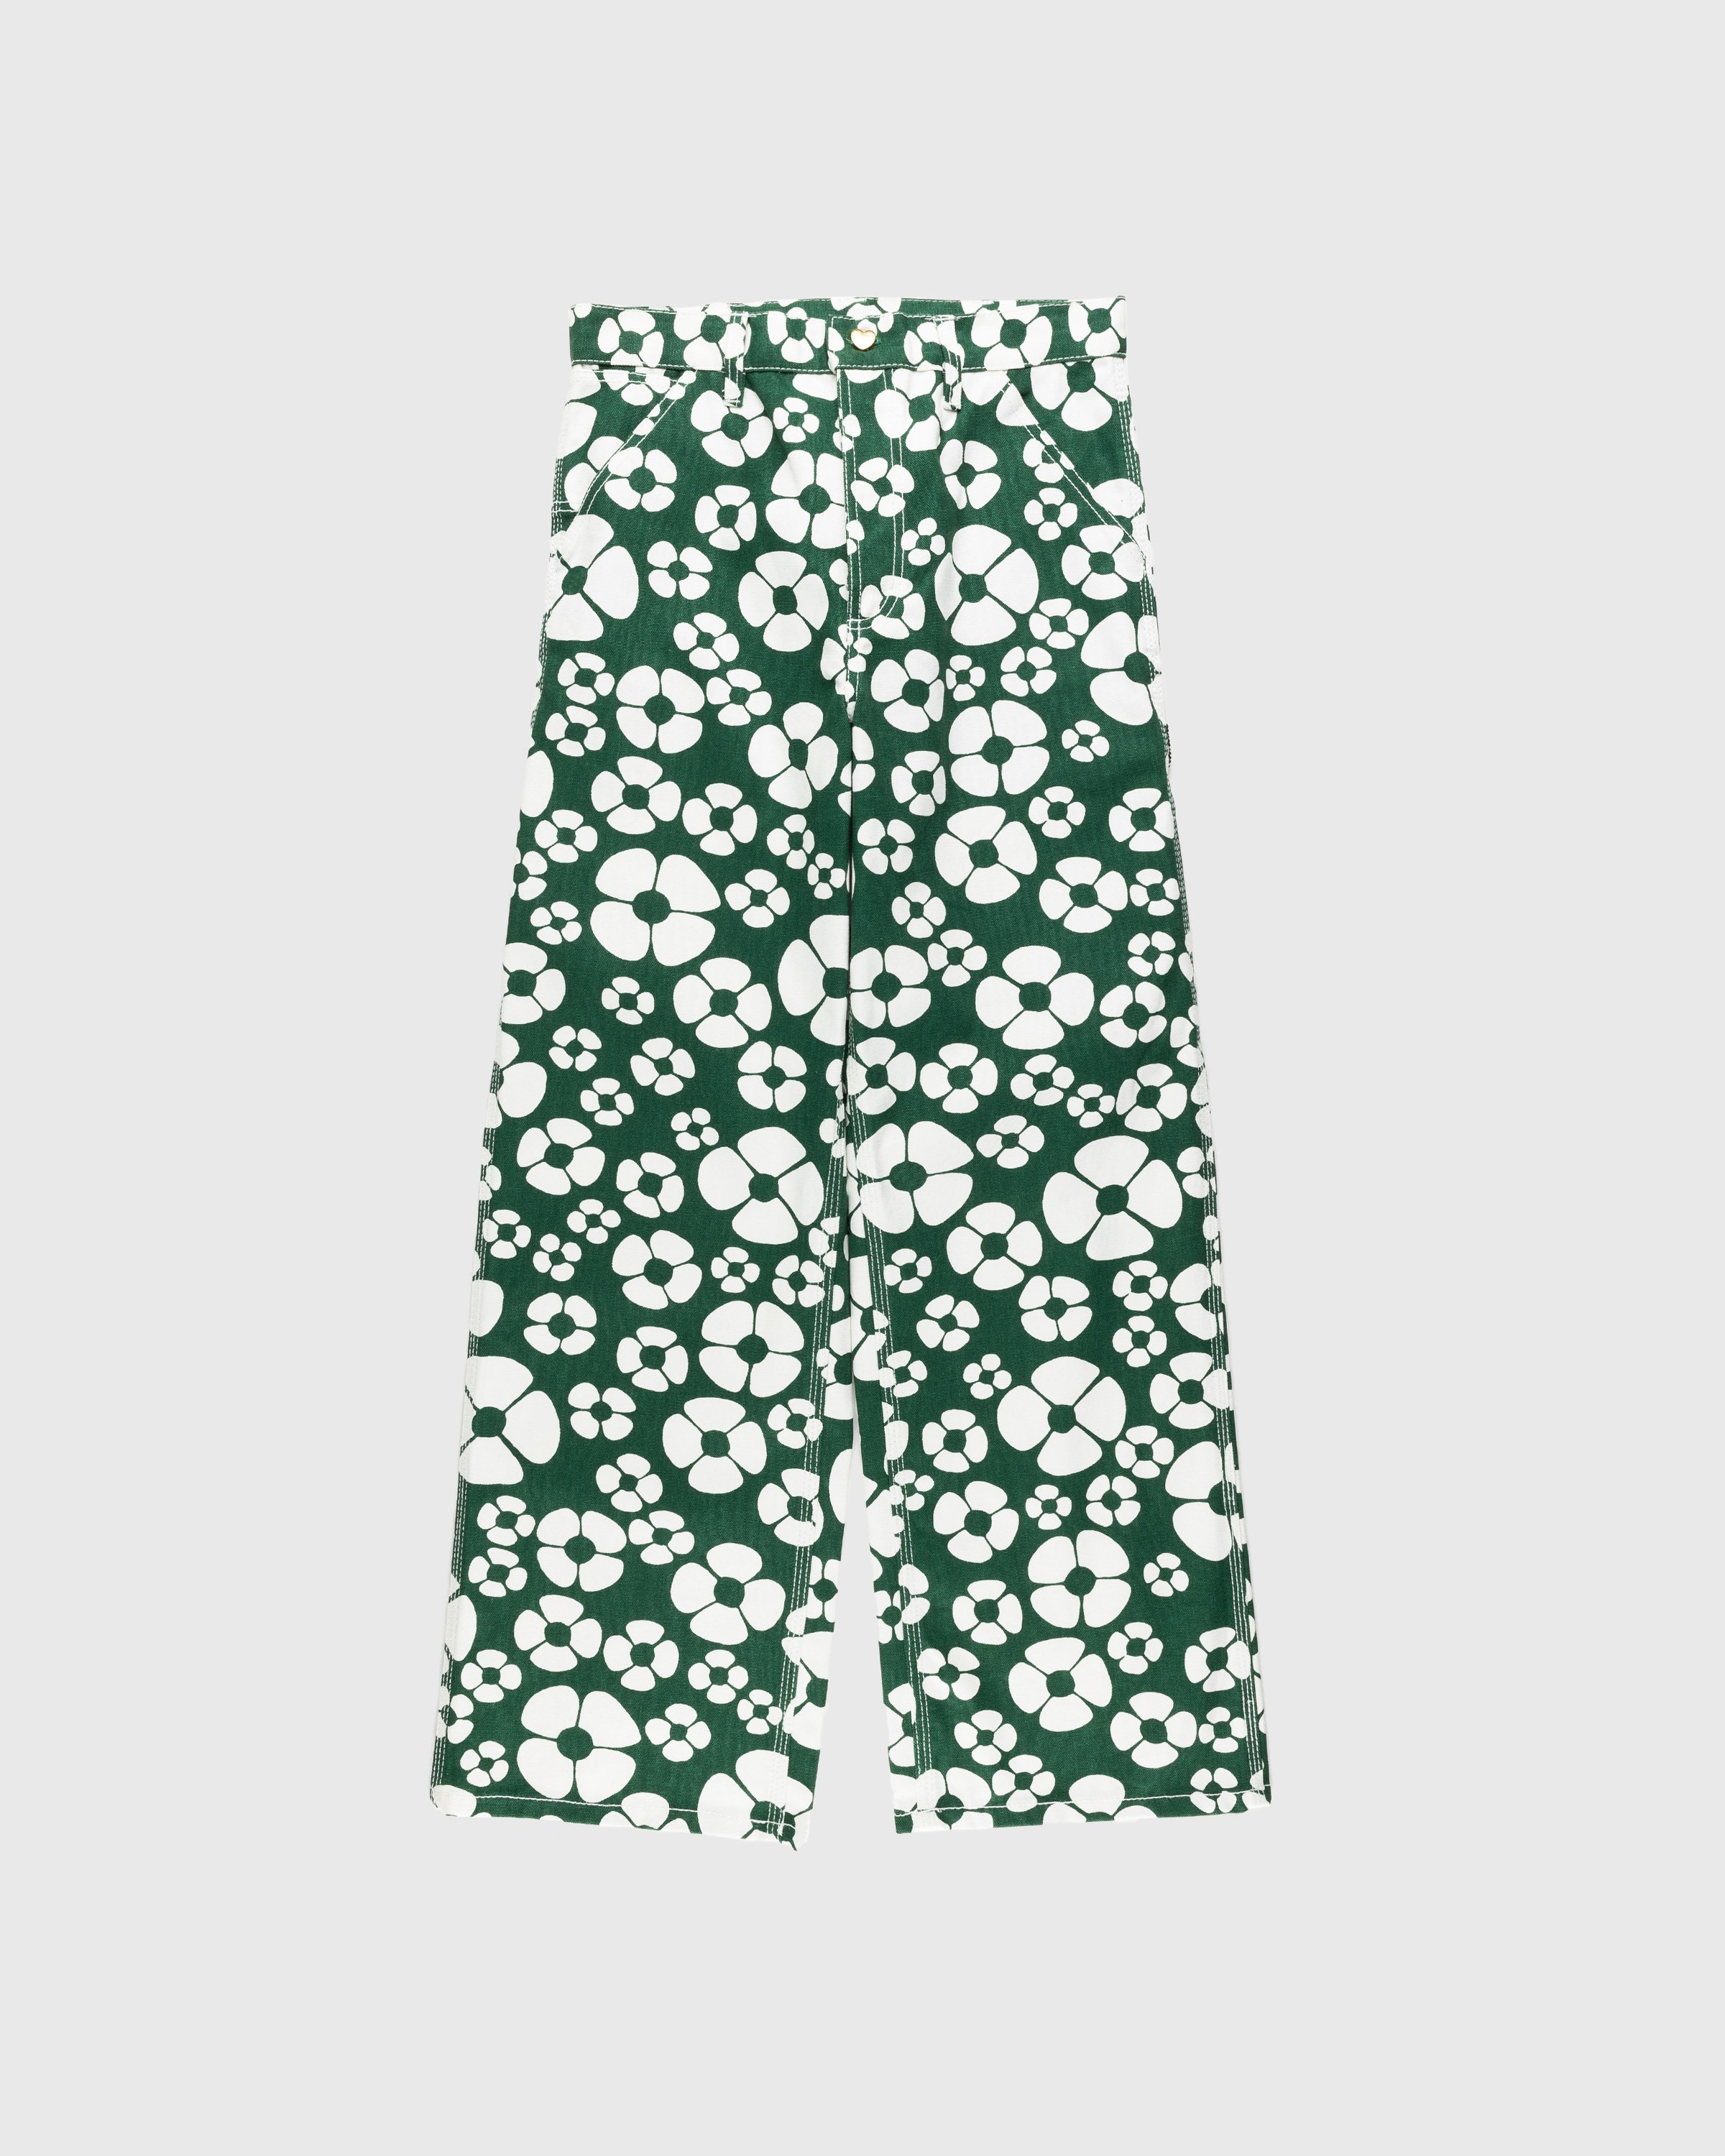 Marni x Carhartt WIP - Floral Trousers Green - Clothing - Green - Image 1